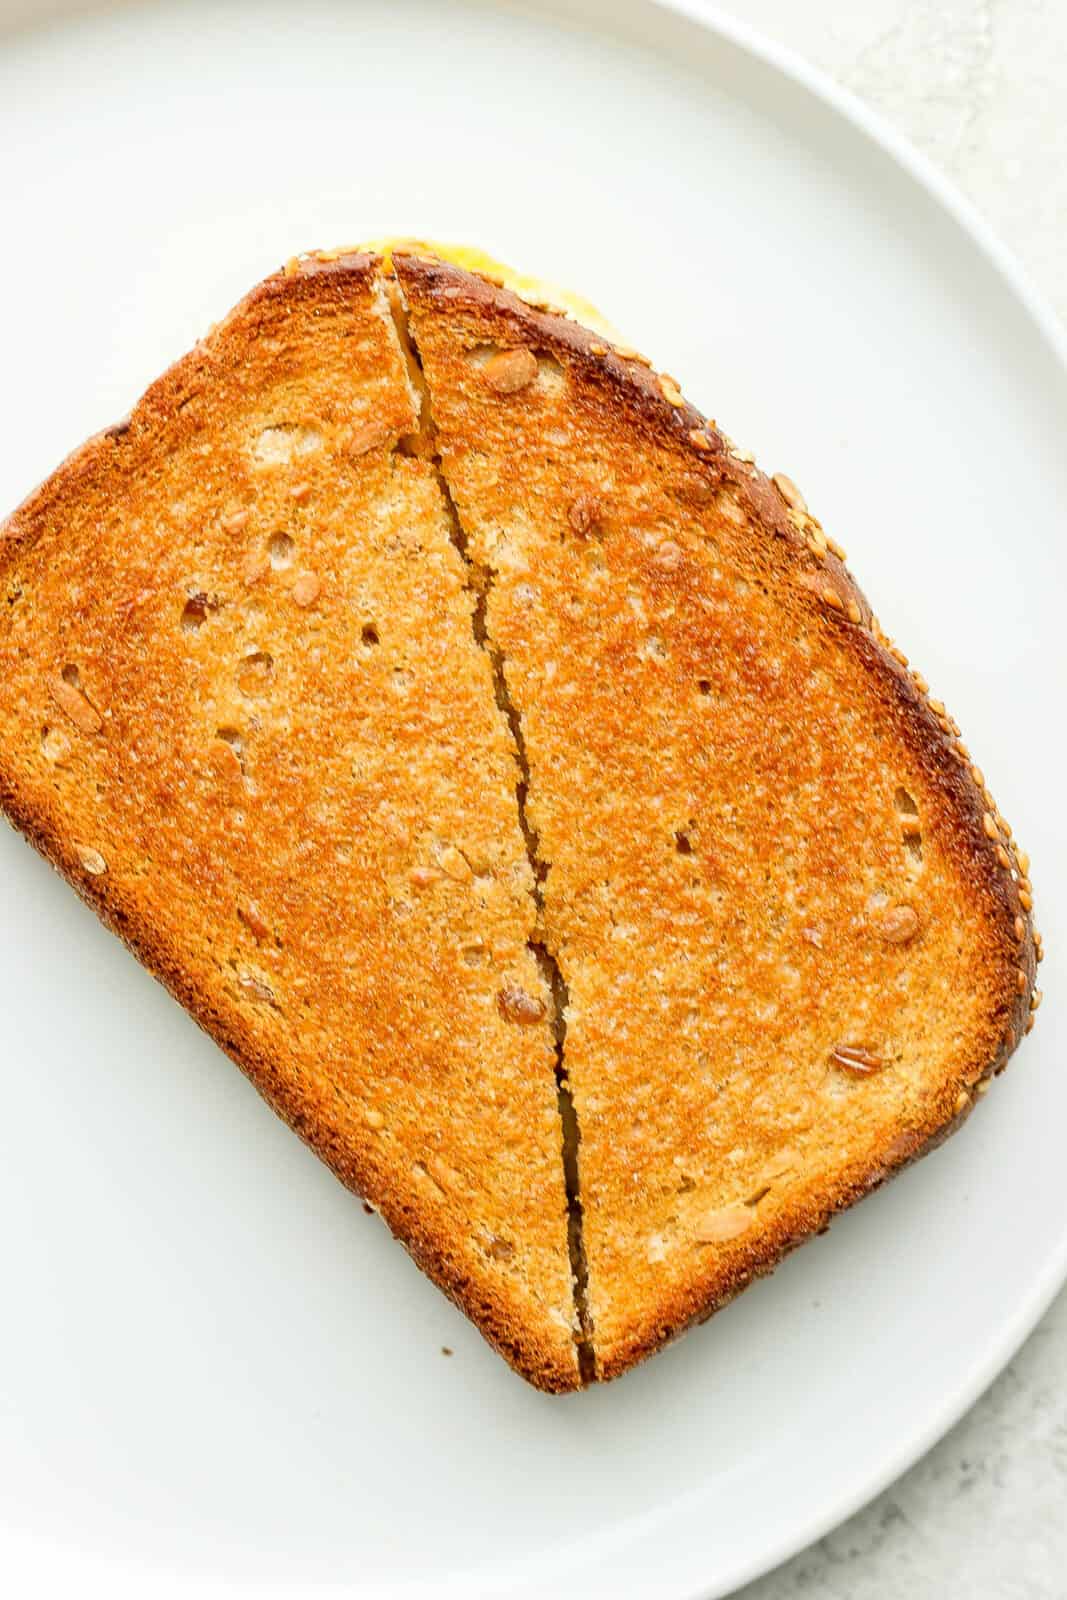 A perfectly browned air fryer grilled cheese cut in half on a plate.